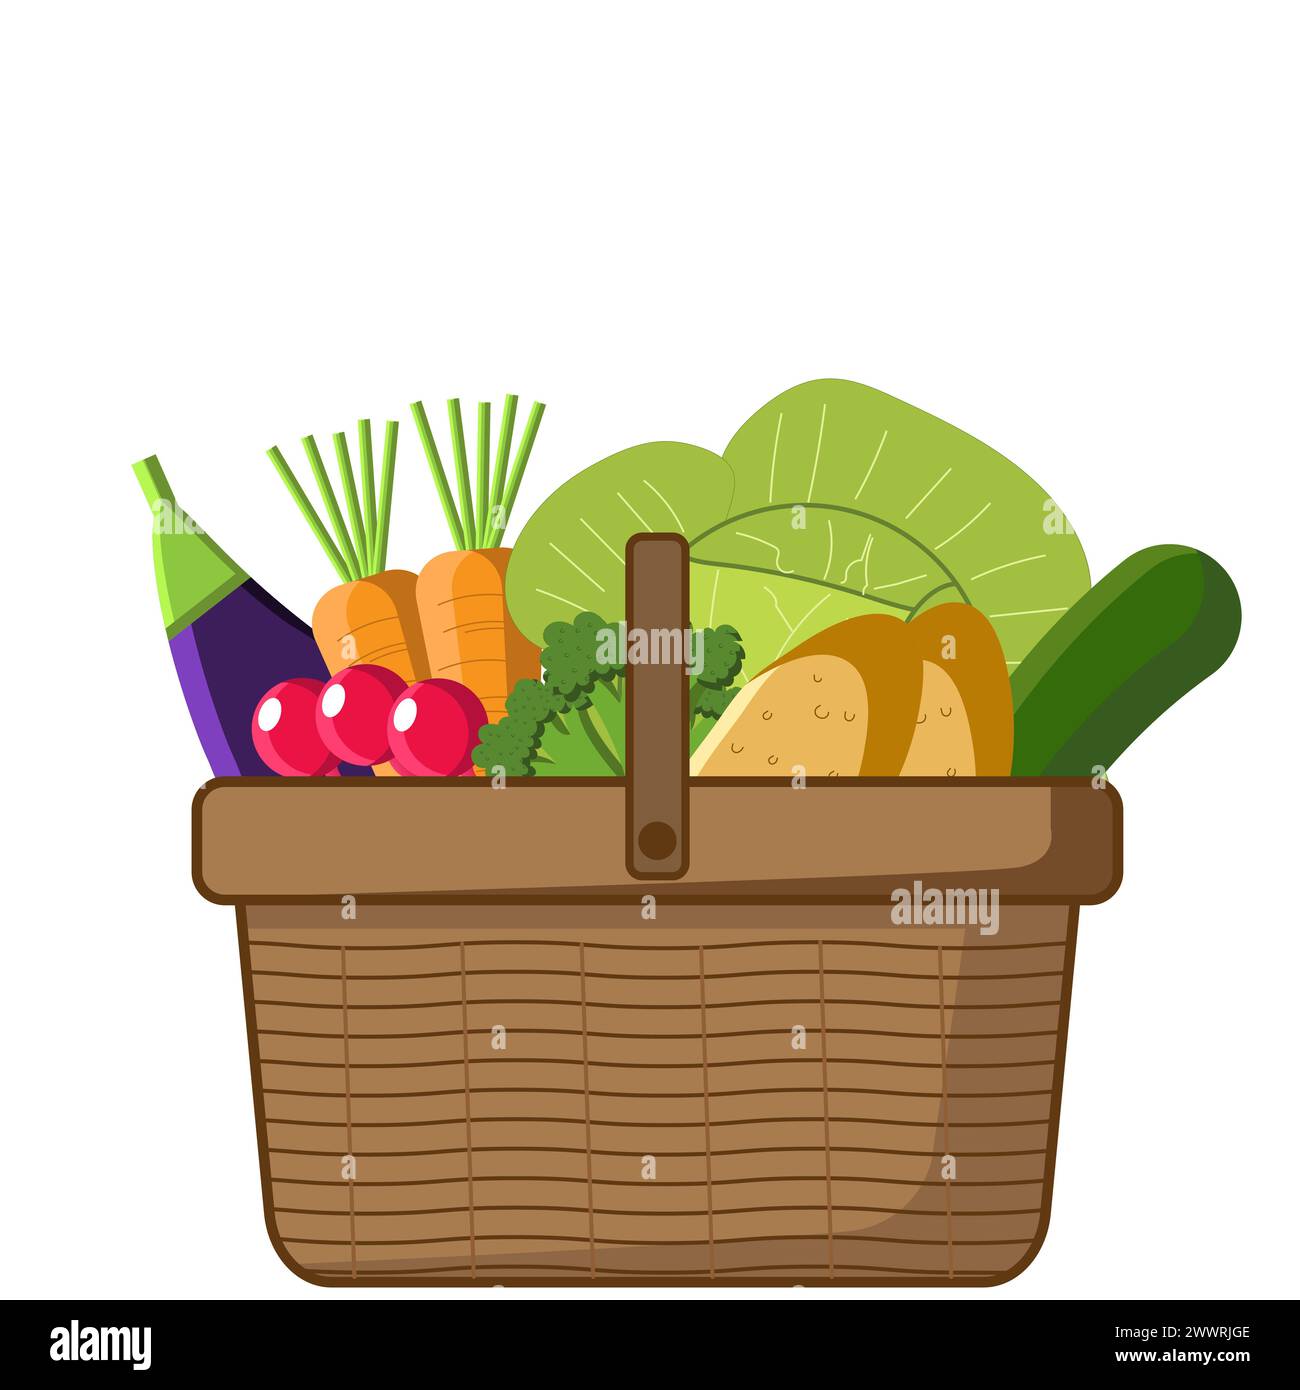 Fresh vegetables in a basket, Cabbage, Potato, Radish, Broccoli clipart, Healthy Eating concept Stock Vector